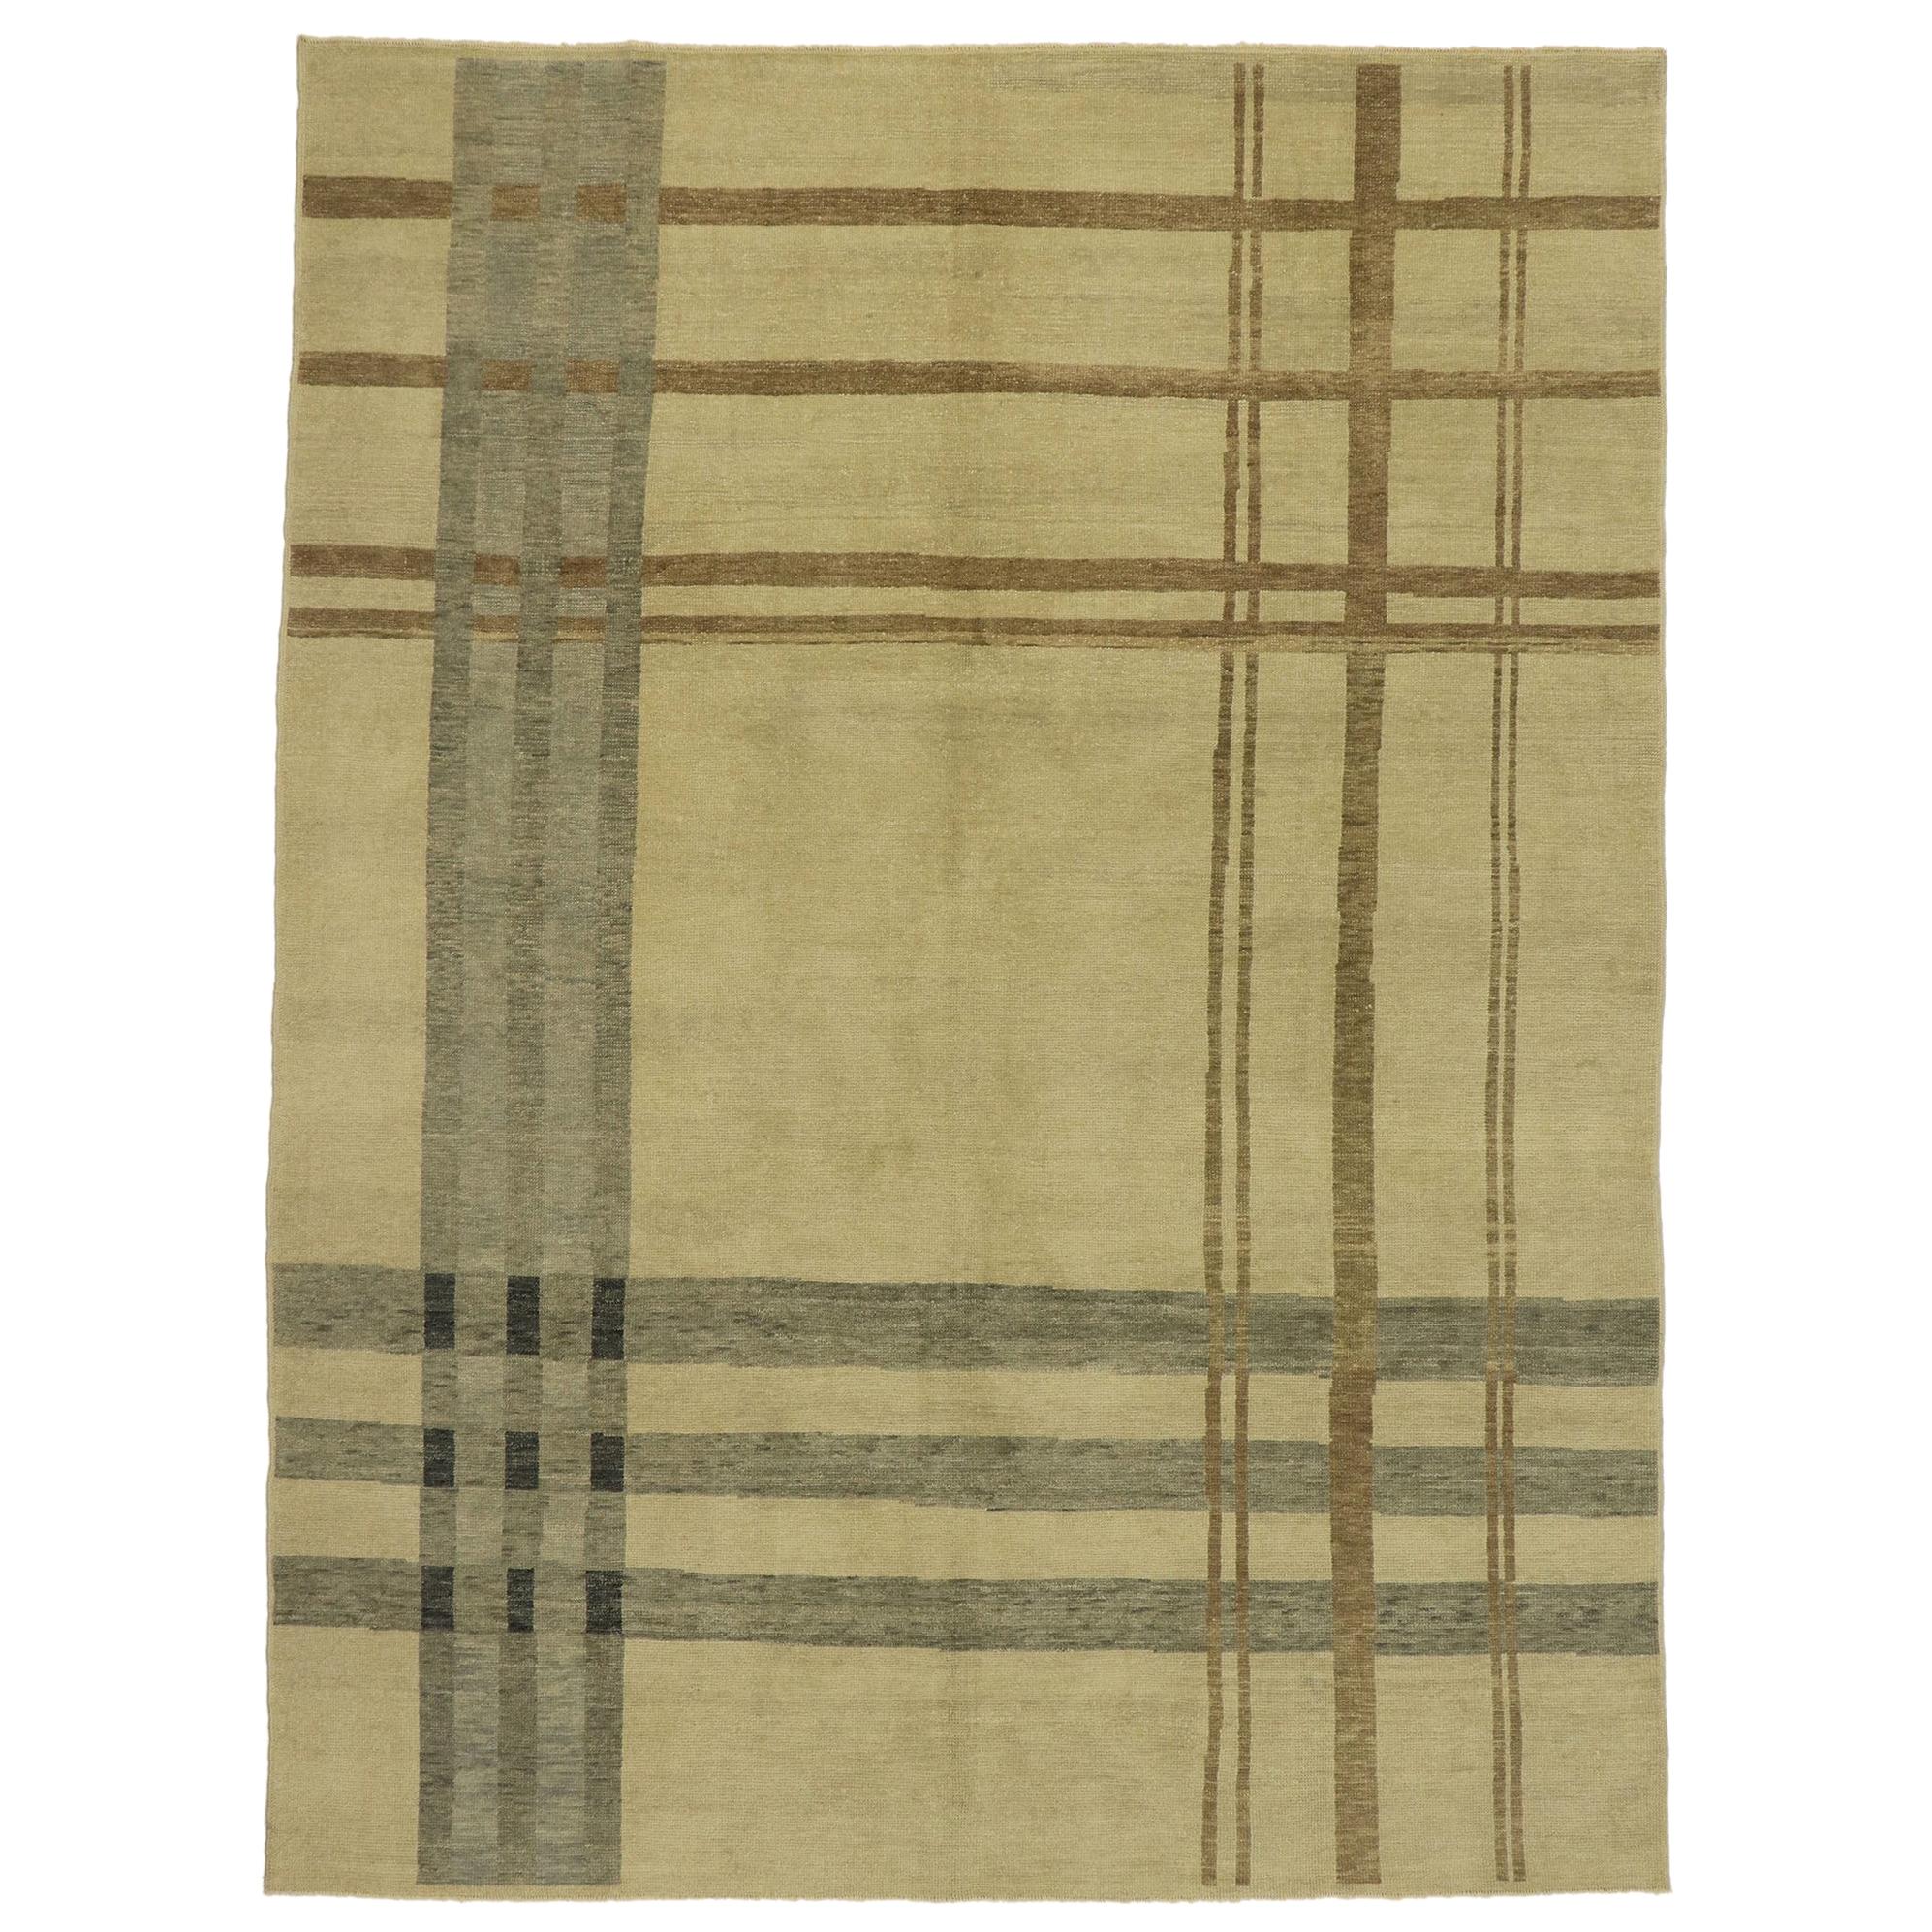 New Neutral Plaid Tartan Rug with Ivy League Style For Sale